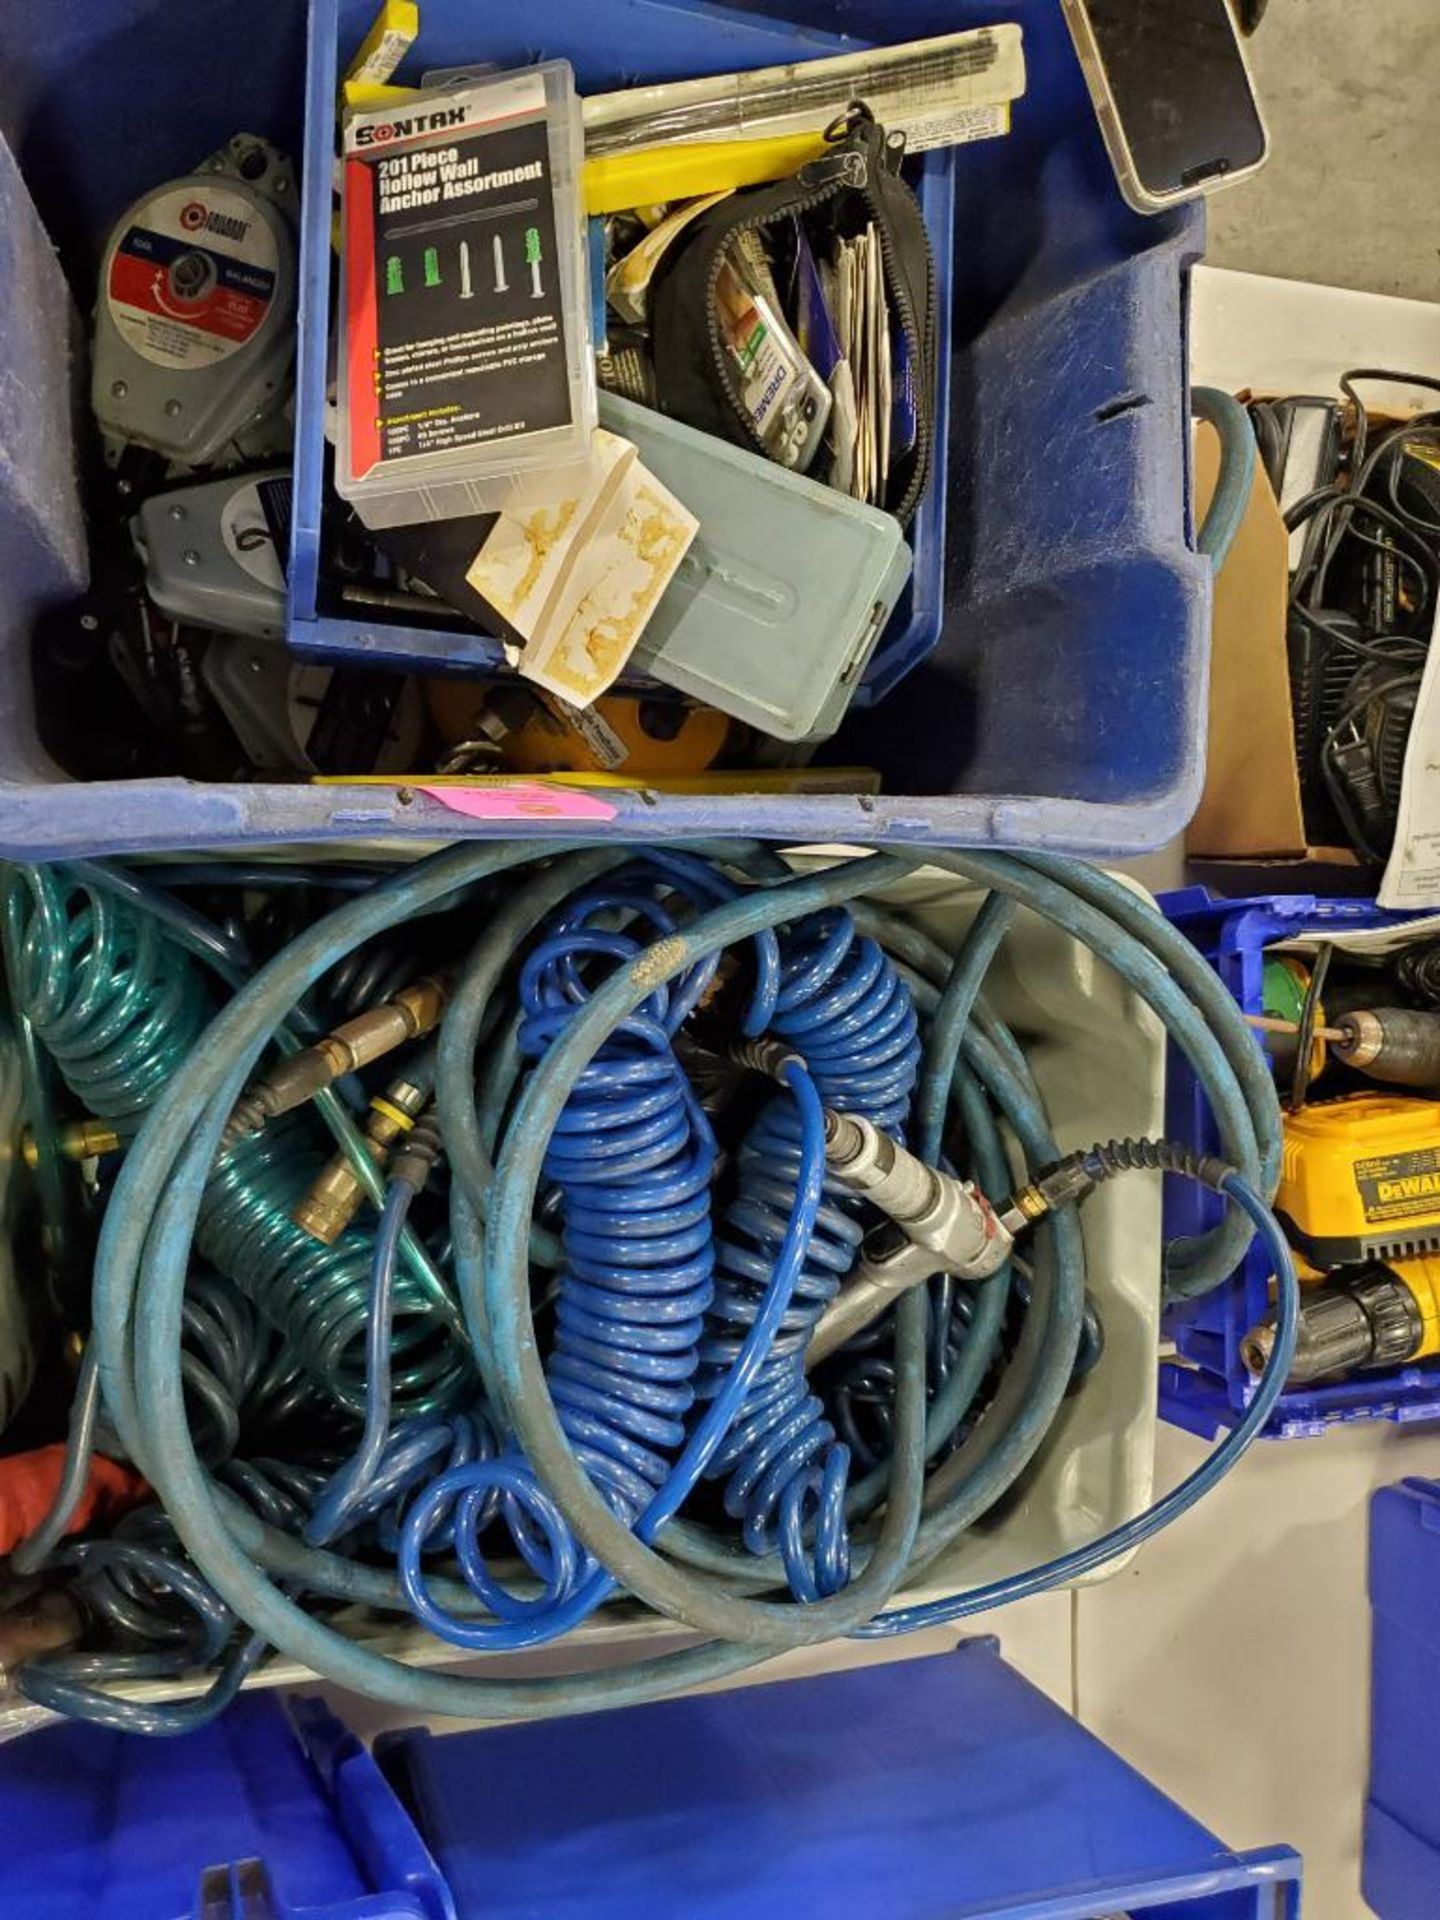 Assorted air tool accessories. Hose lines, tool balancers, and hardware.